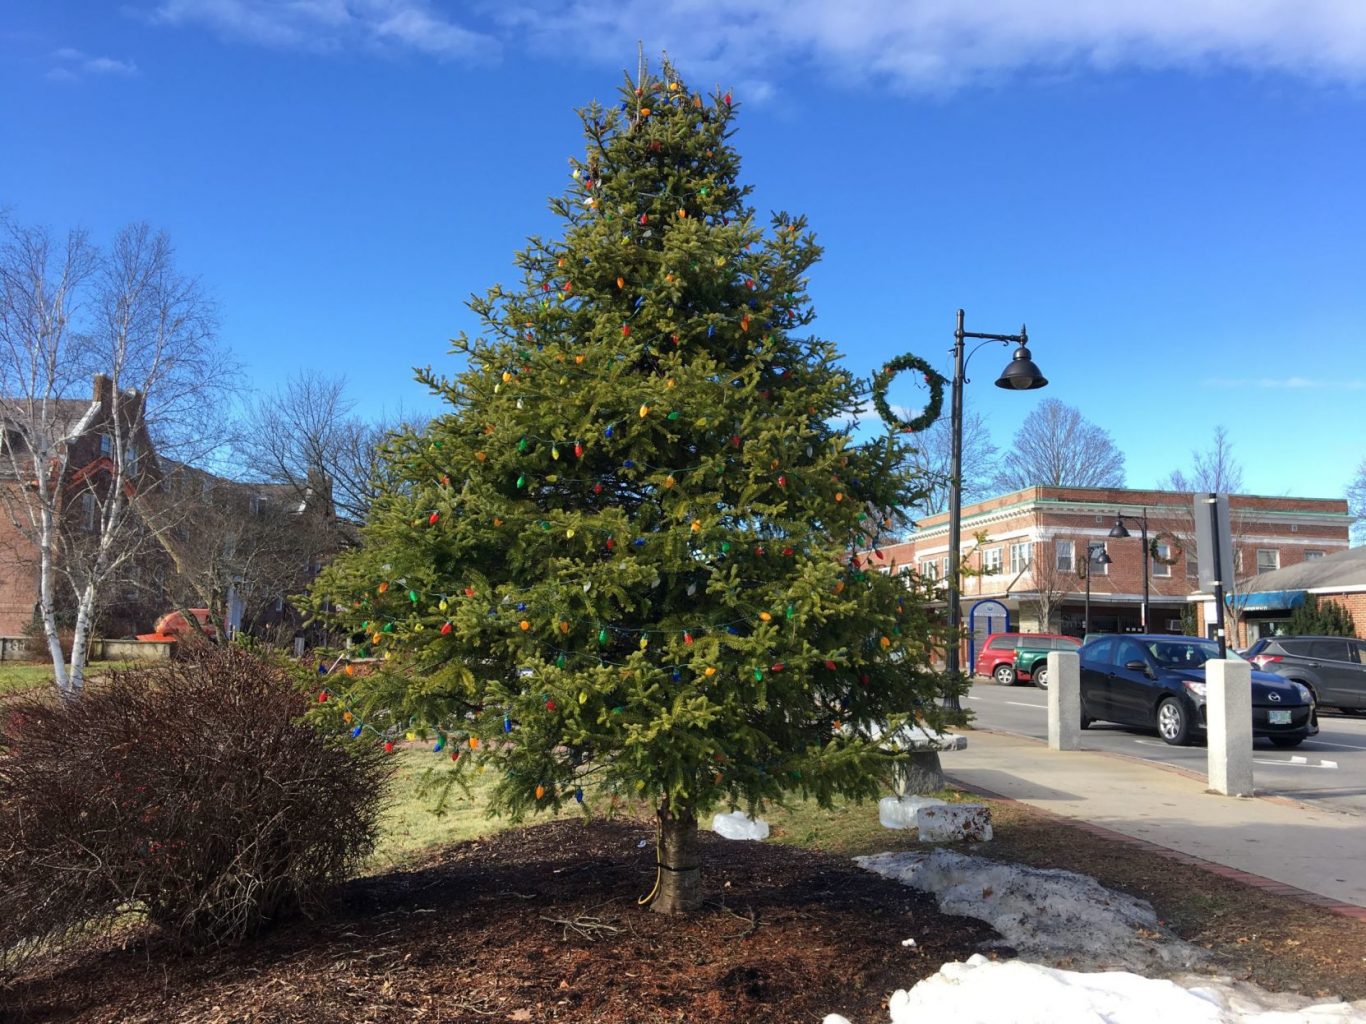 Good Idea or Going Too Far? Durham’s Christmas Tree Deemed Exclusionary